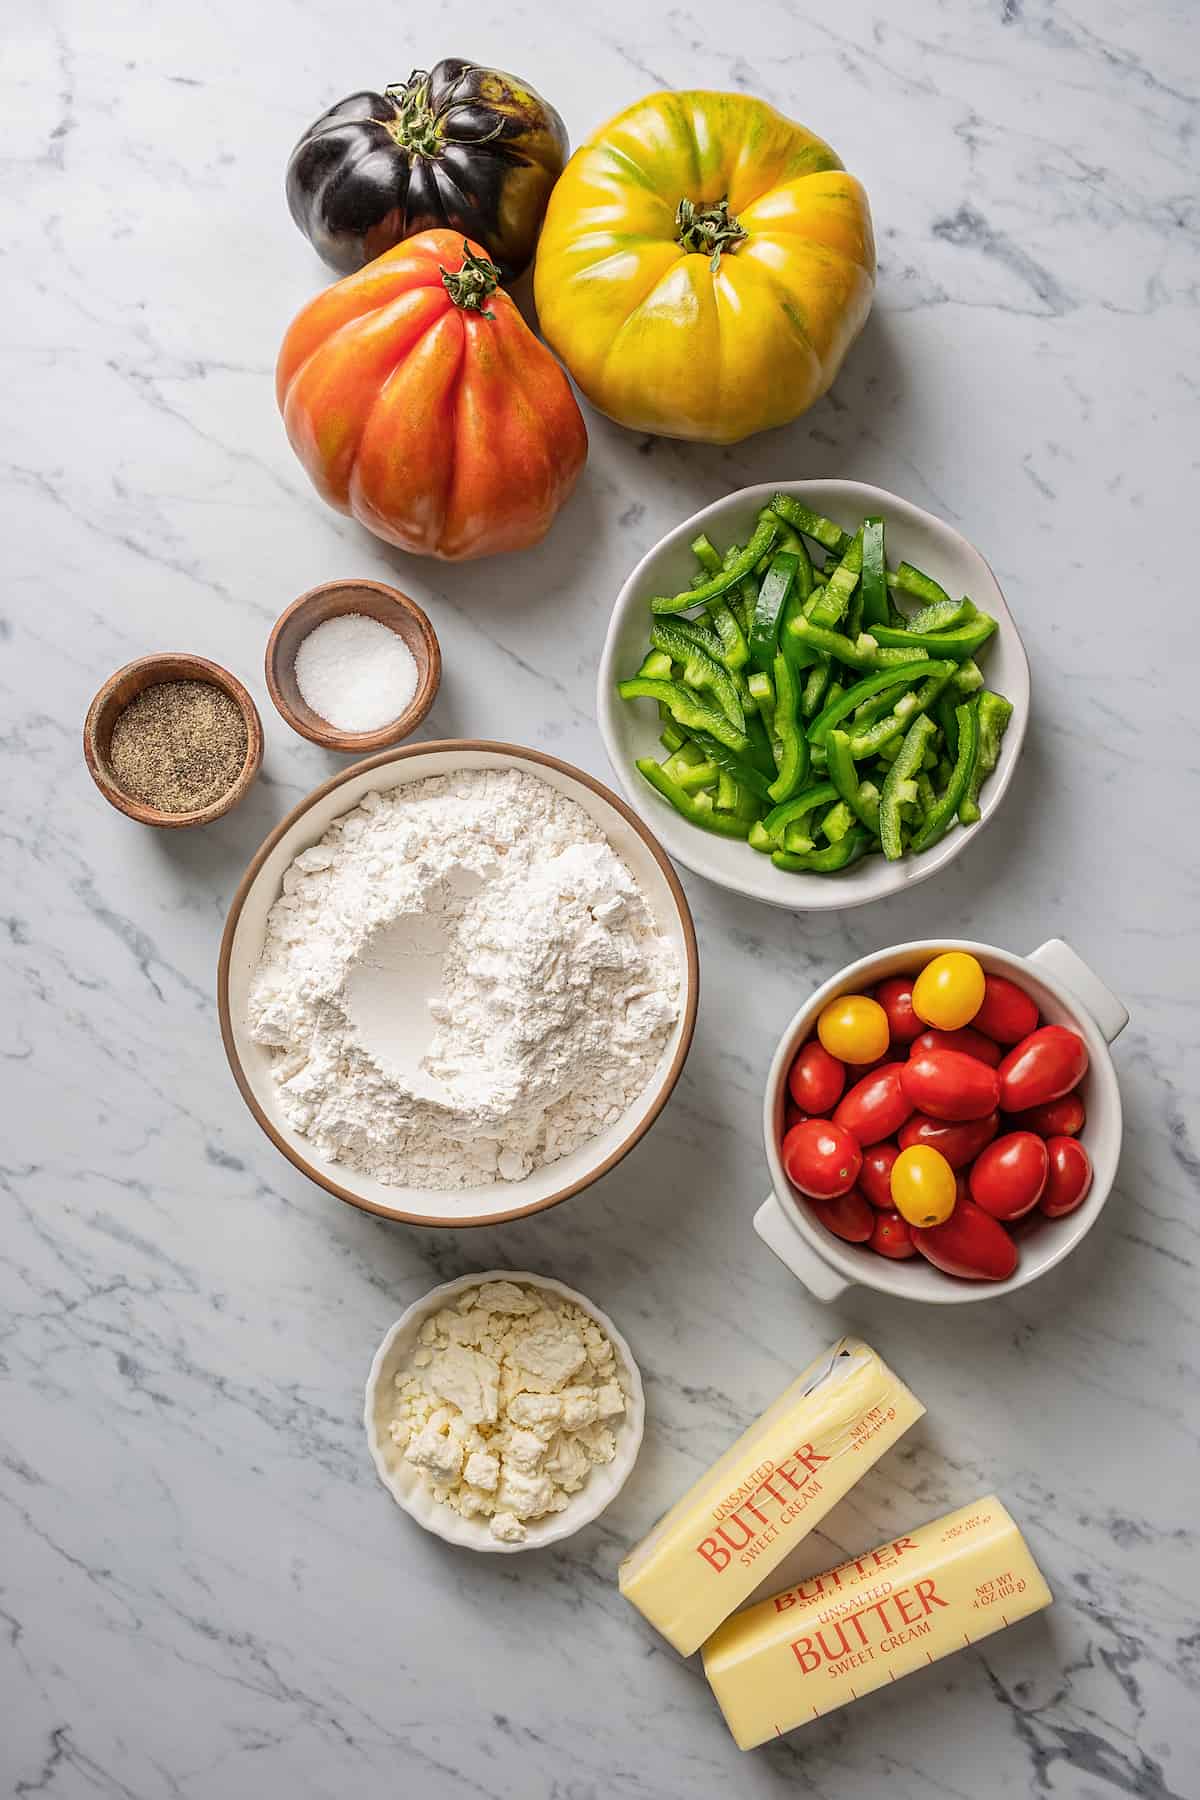 Overhead view of the ingredients needed for a tomato tart: a bowl of flour, a bowl of feta cheese, a bowl of green peppers, a bowl of cherry tomatoes, a bowl of pepper, a bowl of salt, three heirloom tomatoes, and two sticks of butter